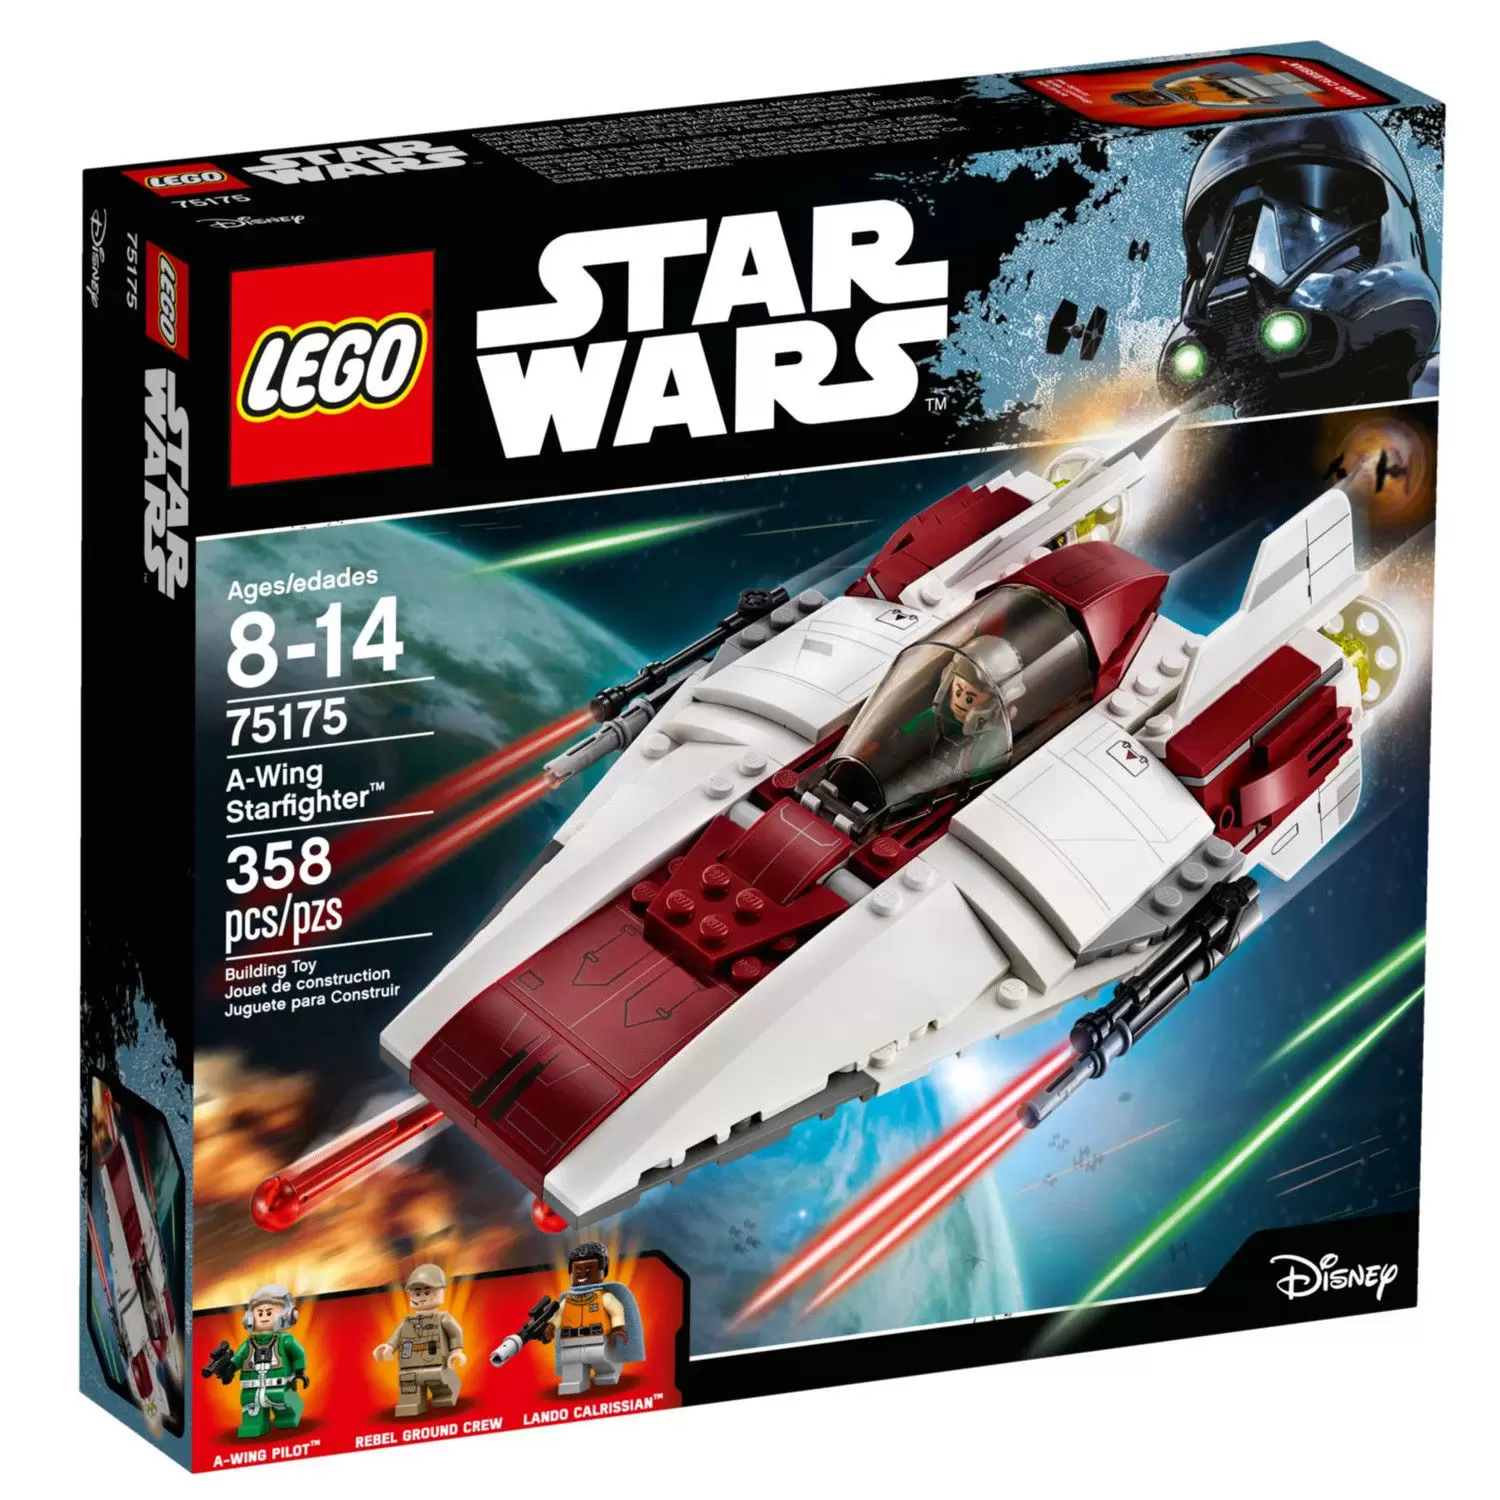 LEGO Star Wars - A-Wing Starfighter